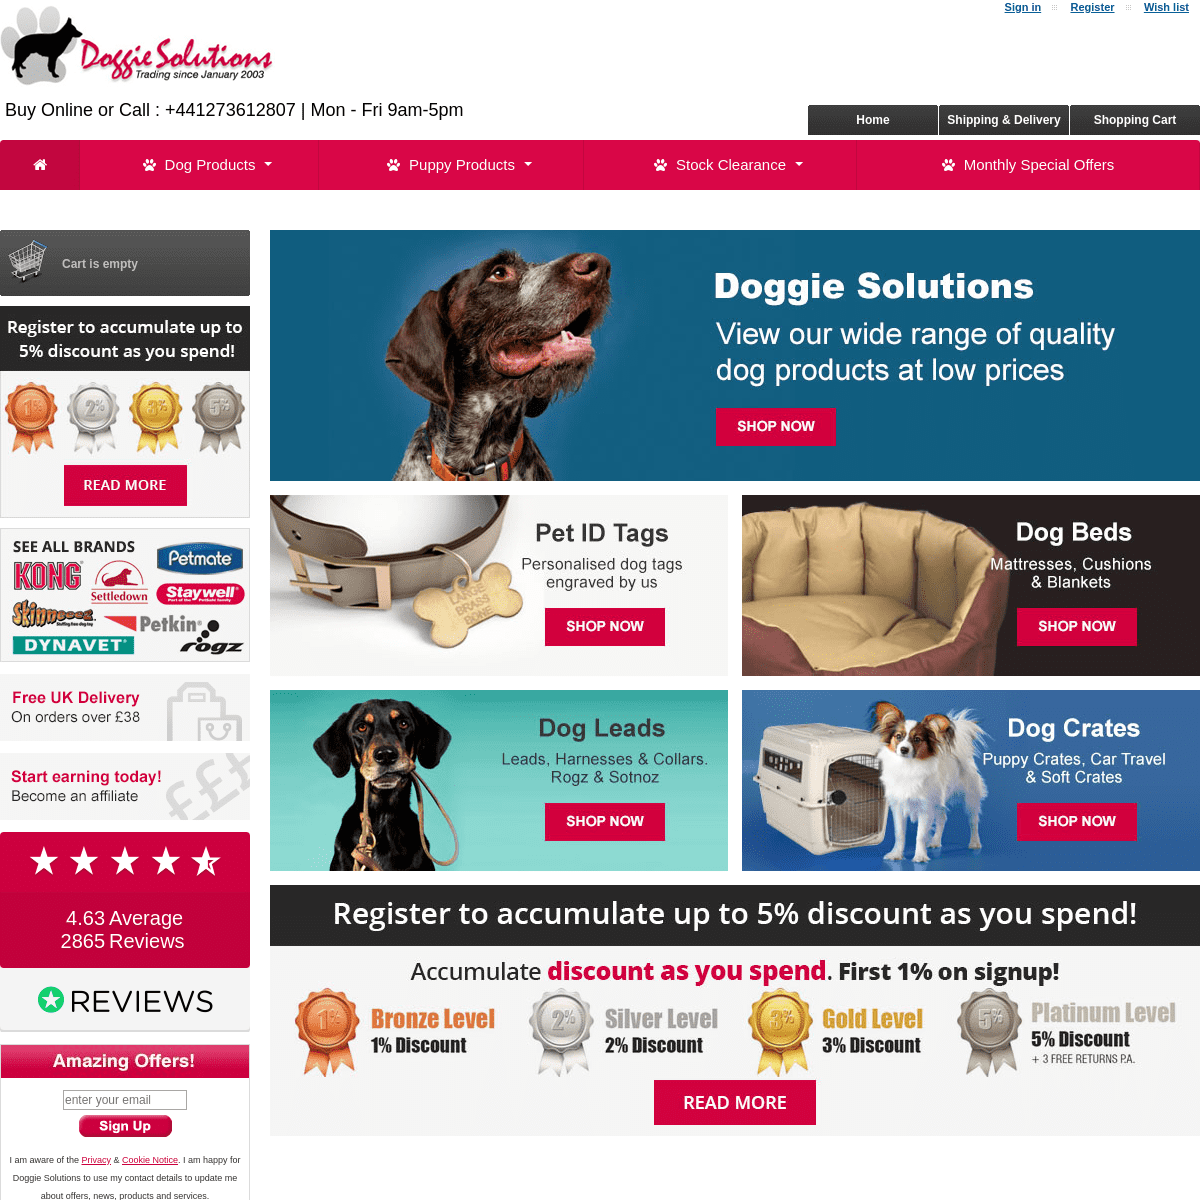 A complete backup of doggiesolutions.co.uk